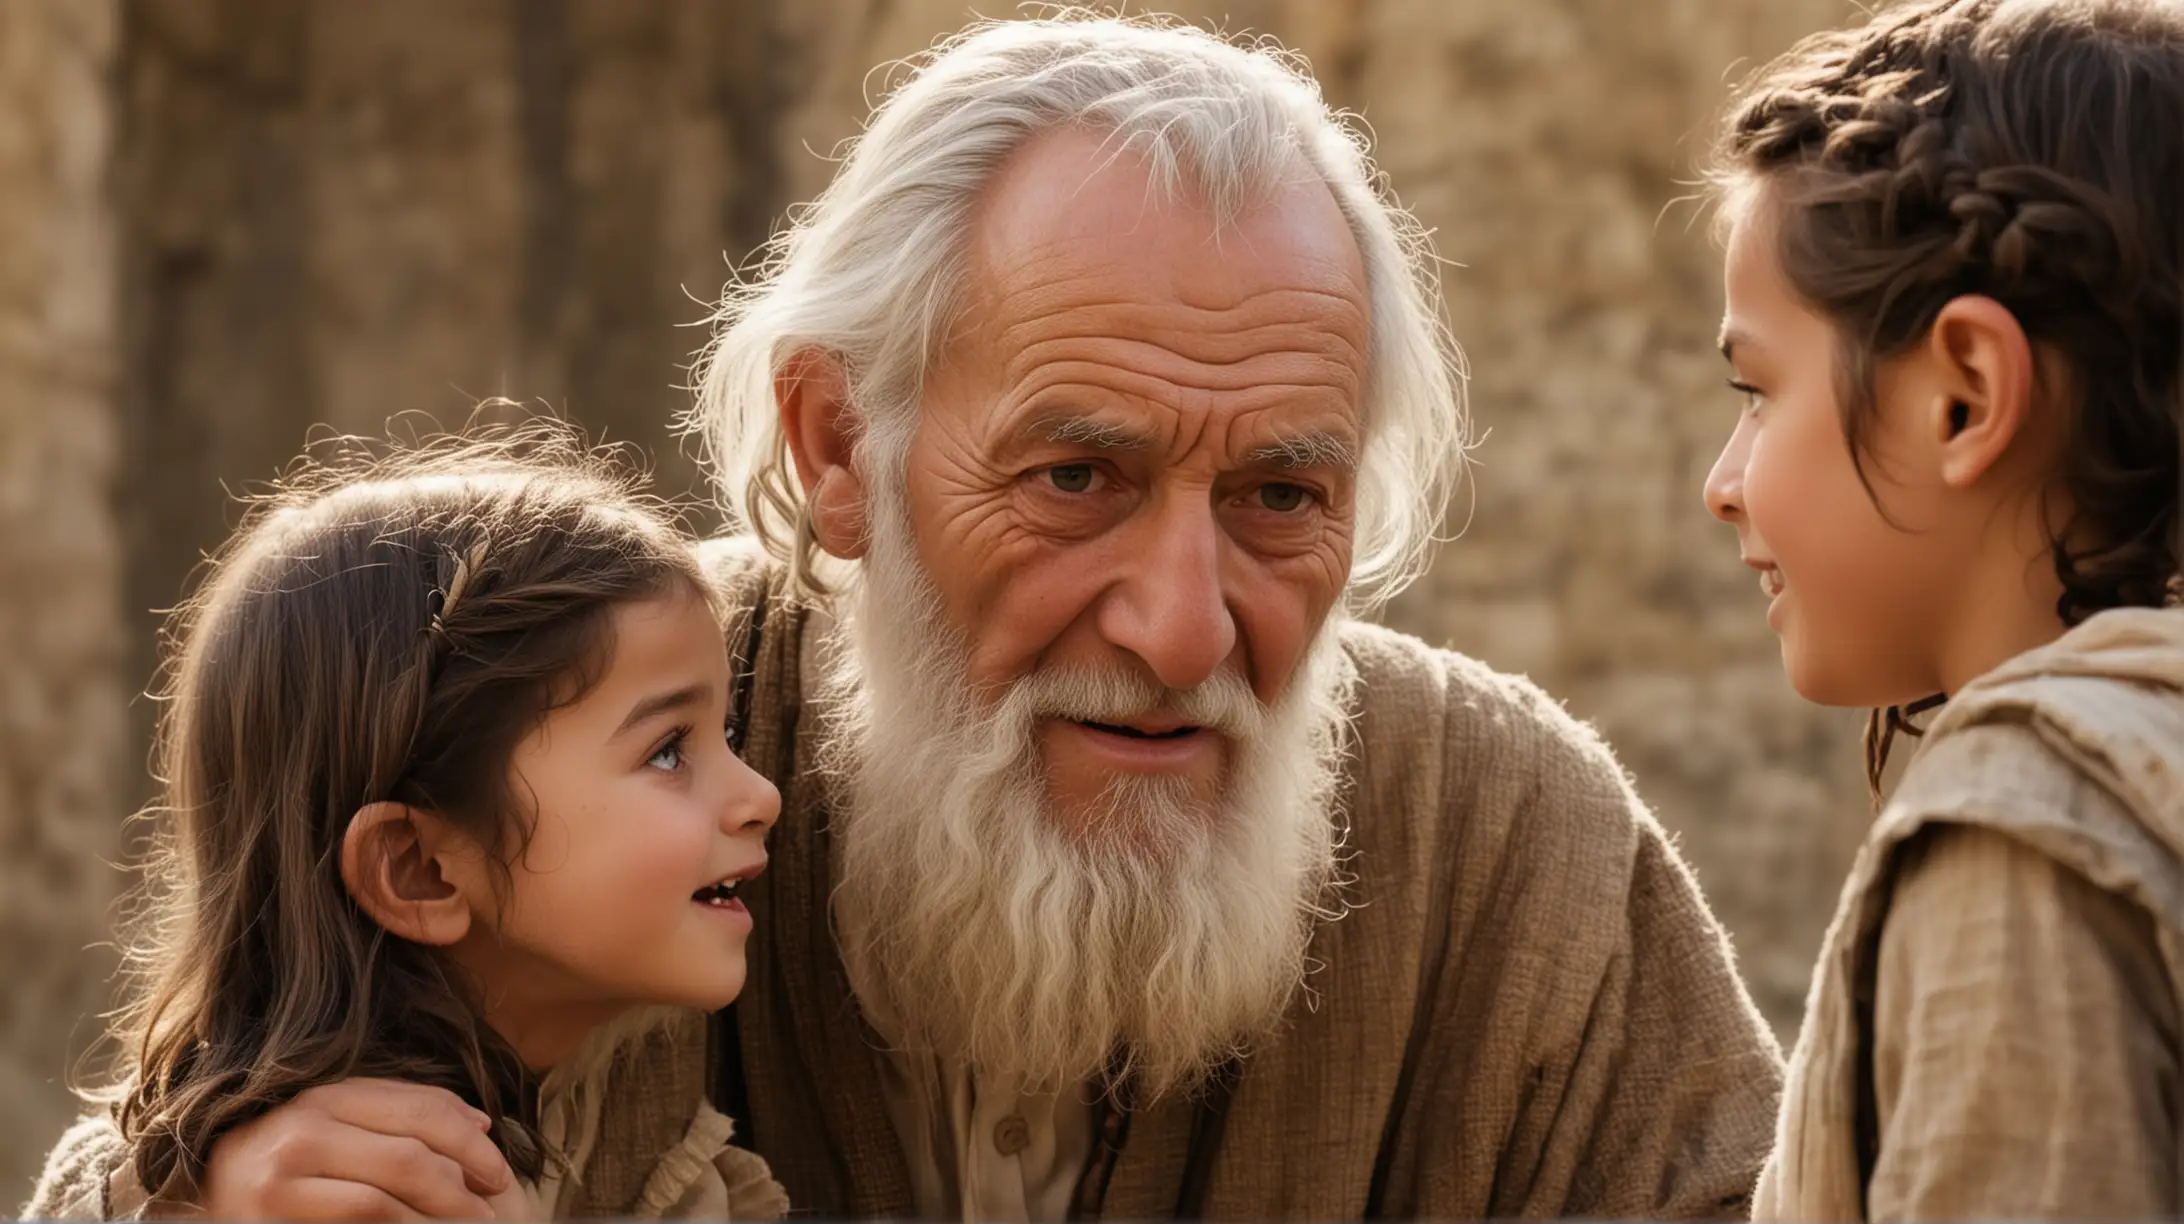 A close up of an old man talking to a child. Set during the Biblical Era of King David.